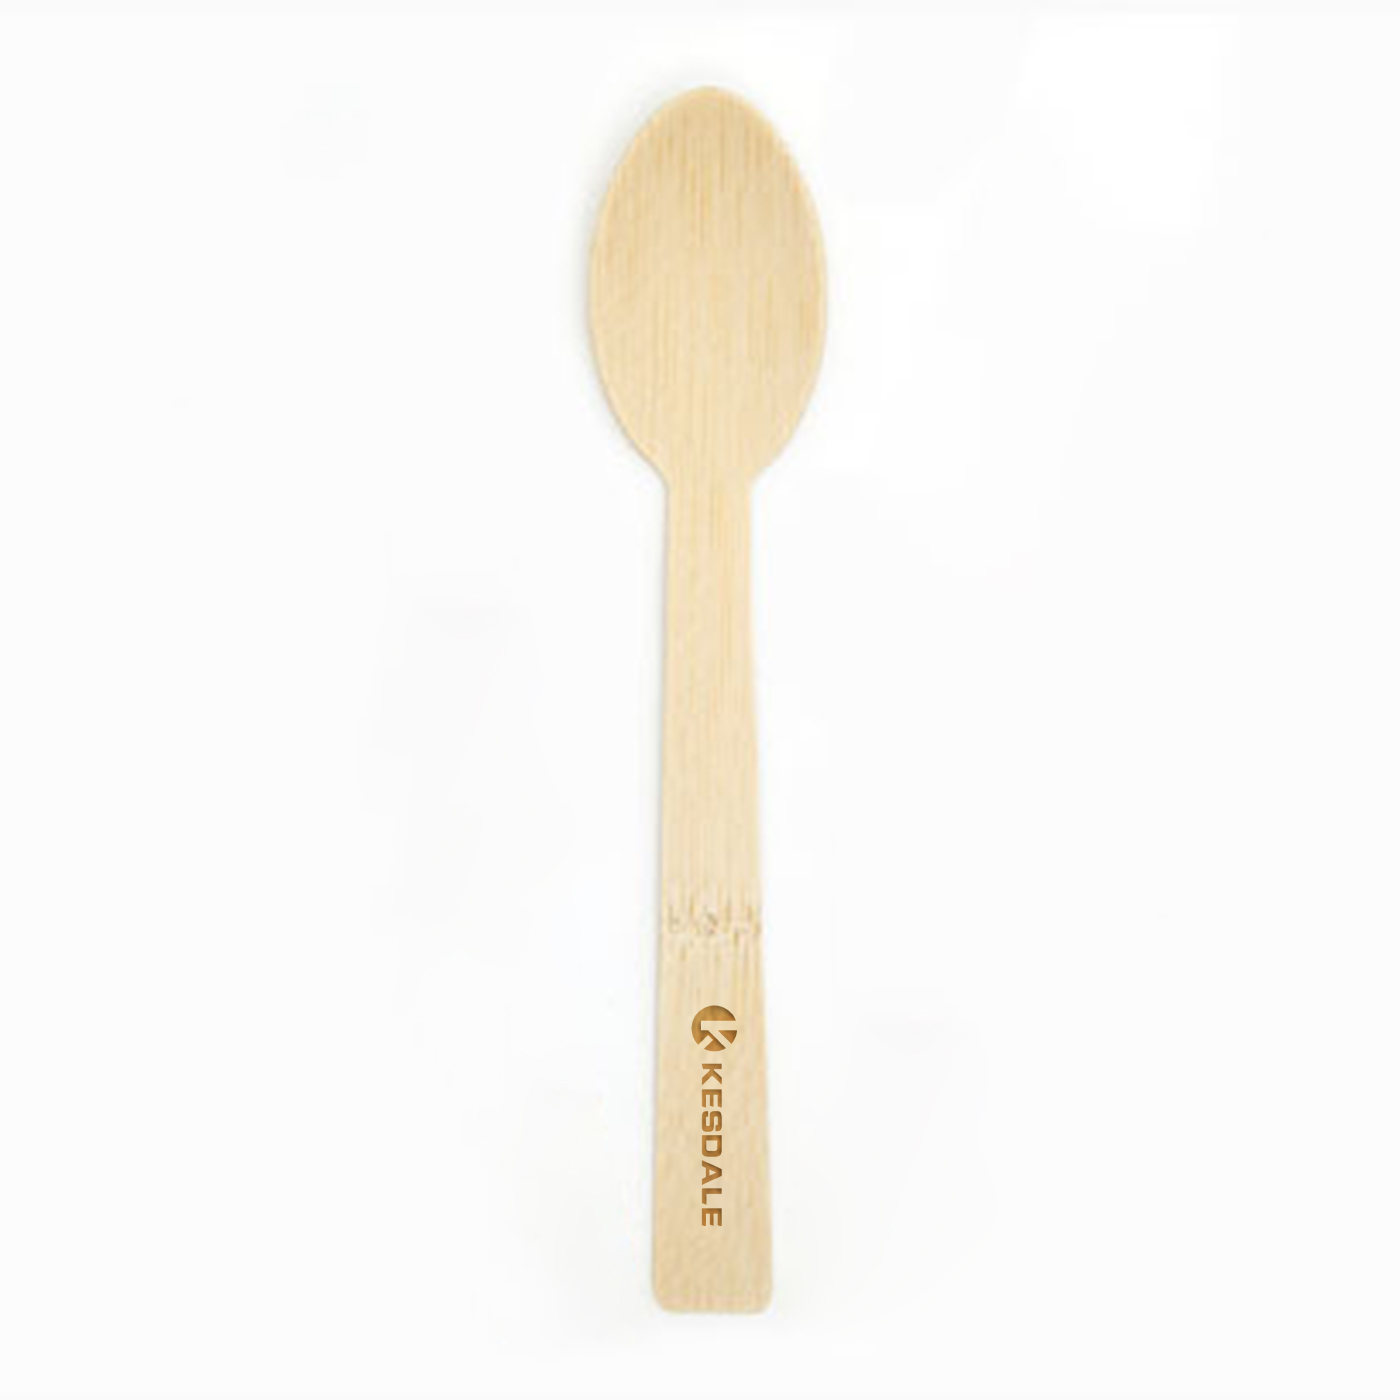 Biodegradable Disposable Bamboo Spoon